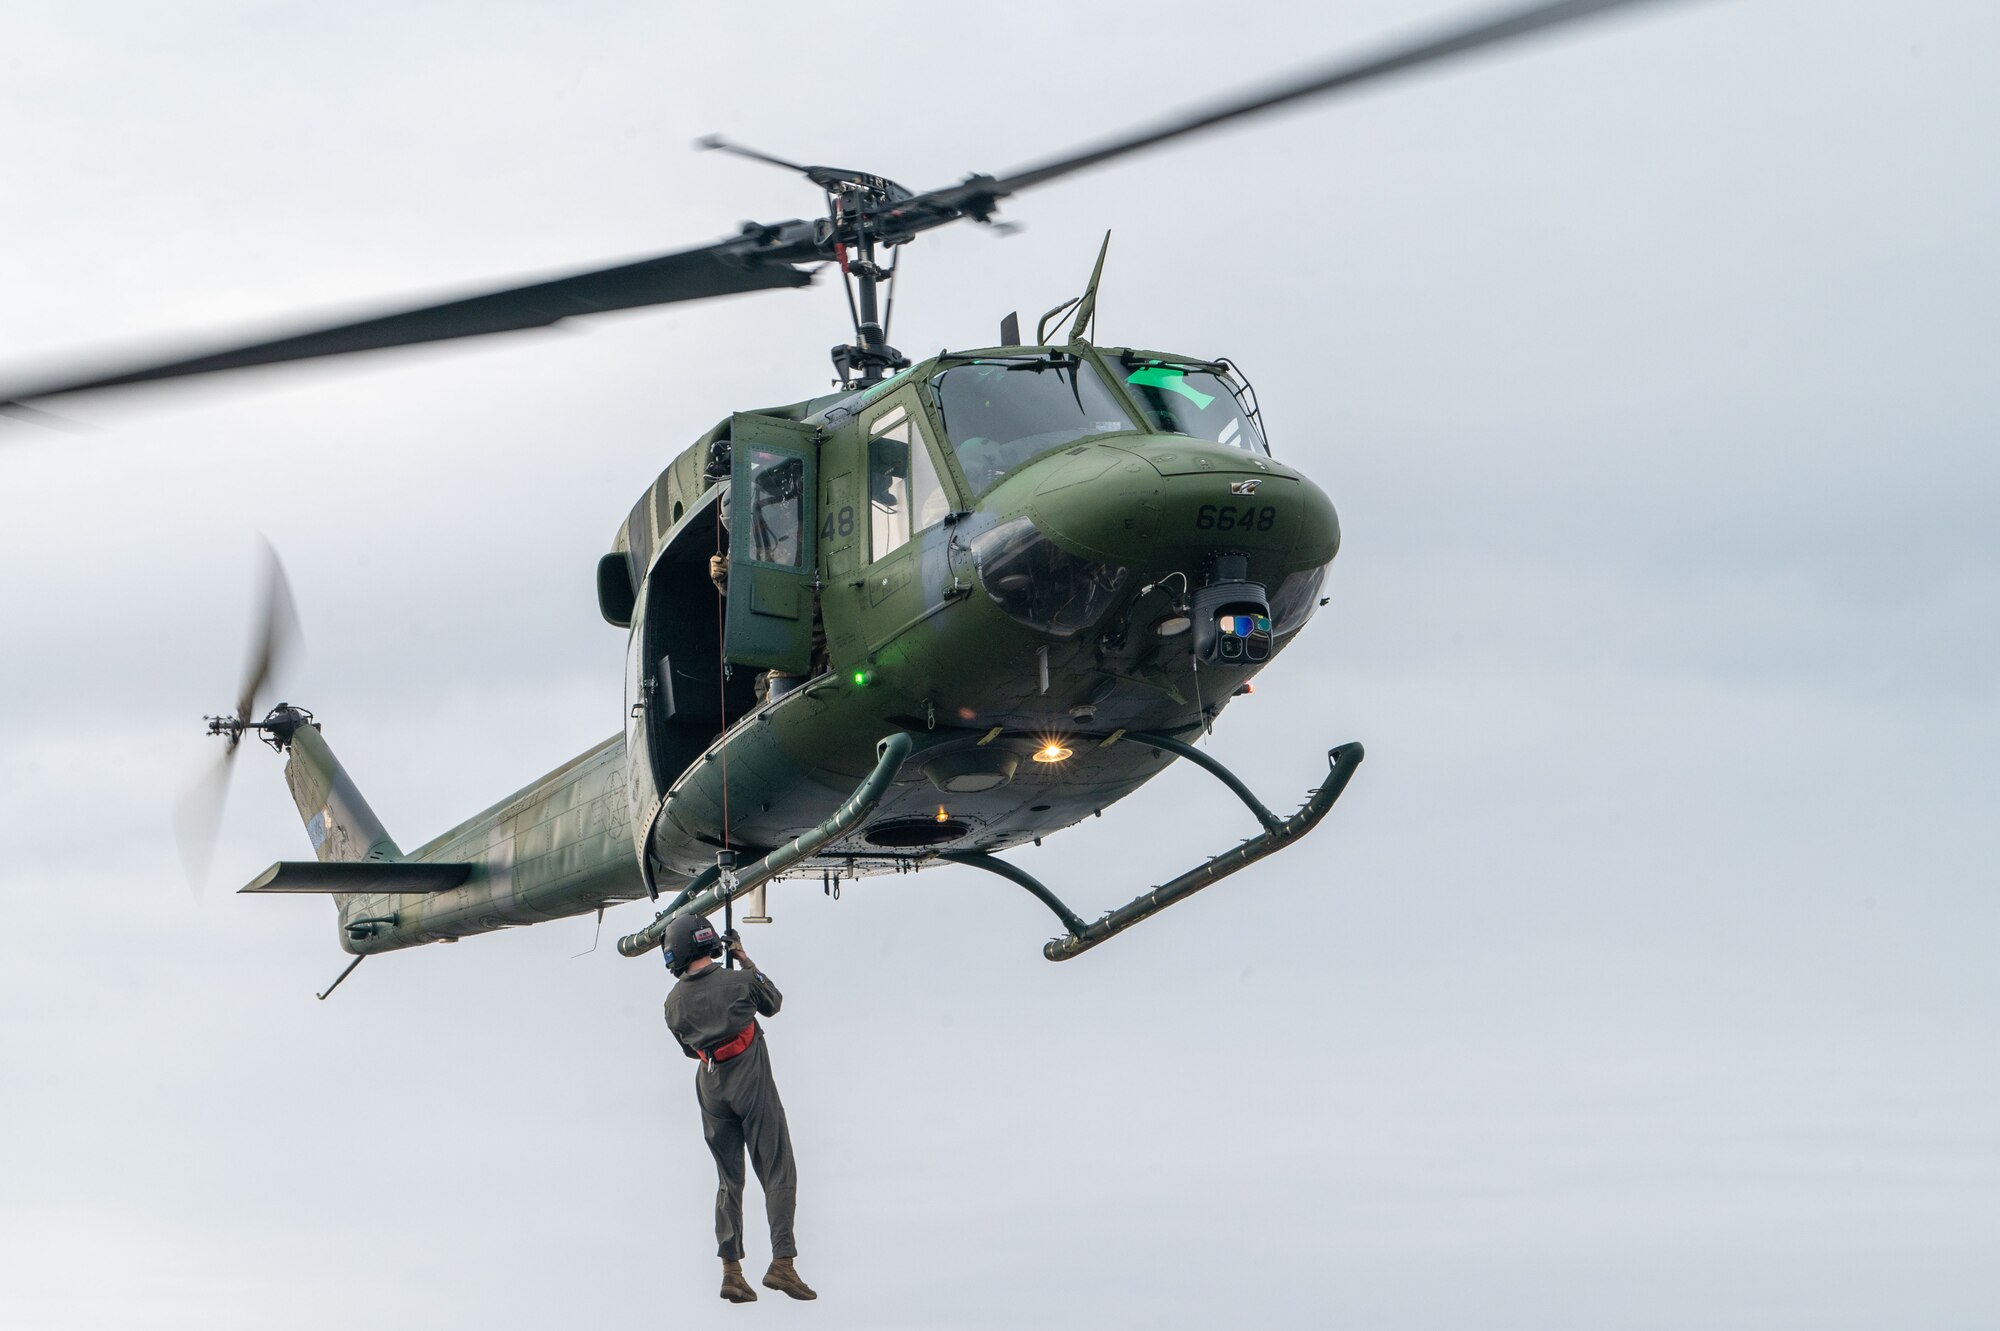 A U.S. Air Force Senior Airman Devin Hackney, 36th Rescue Squadron special mission aviator, hoists down from a UH-1N Huey as a demo prior to the celebration of UH-1N Huey number 6648 reaching 20,000 flight hours at Fairchild Air Force Base, Washington, Jan. 13, 2023. The Huey reaching 20,000 is the highest number of flight hours for Huey’s across the Department of Defense. (U.S. Air Force photo by Airman 1st Class Stassney Davis)